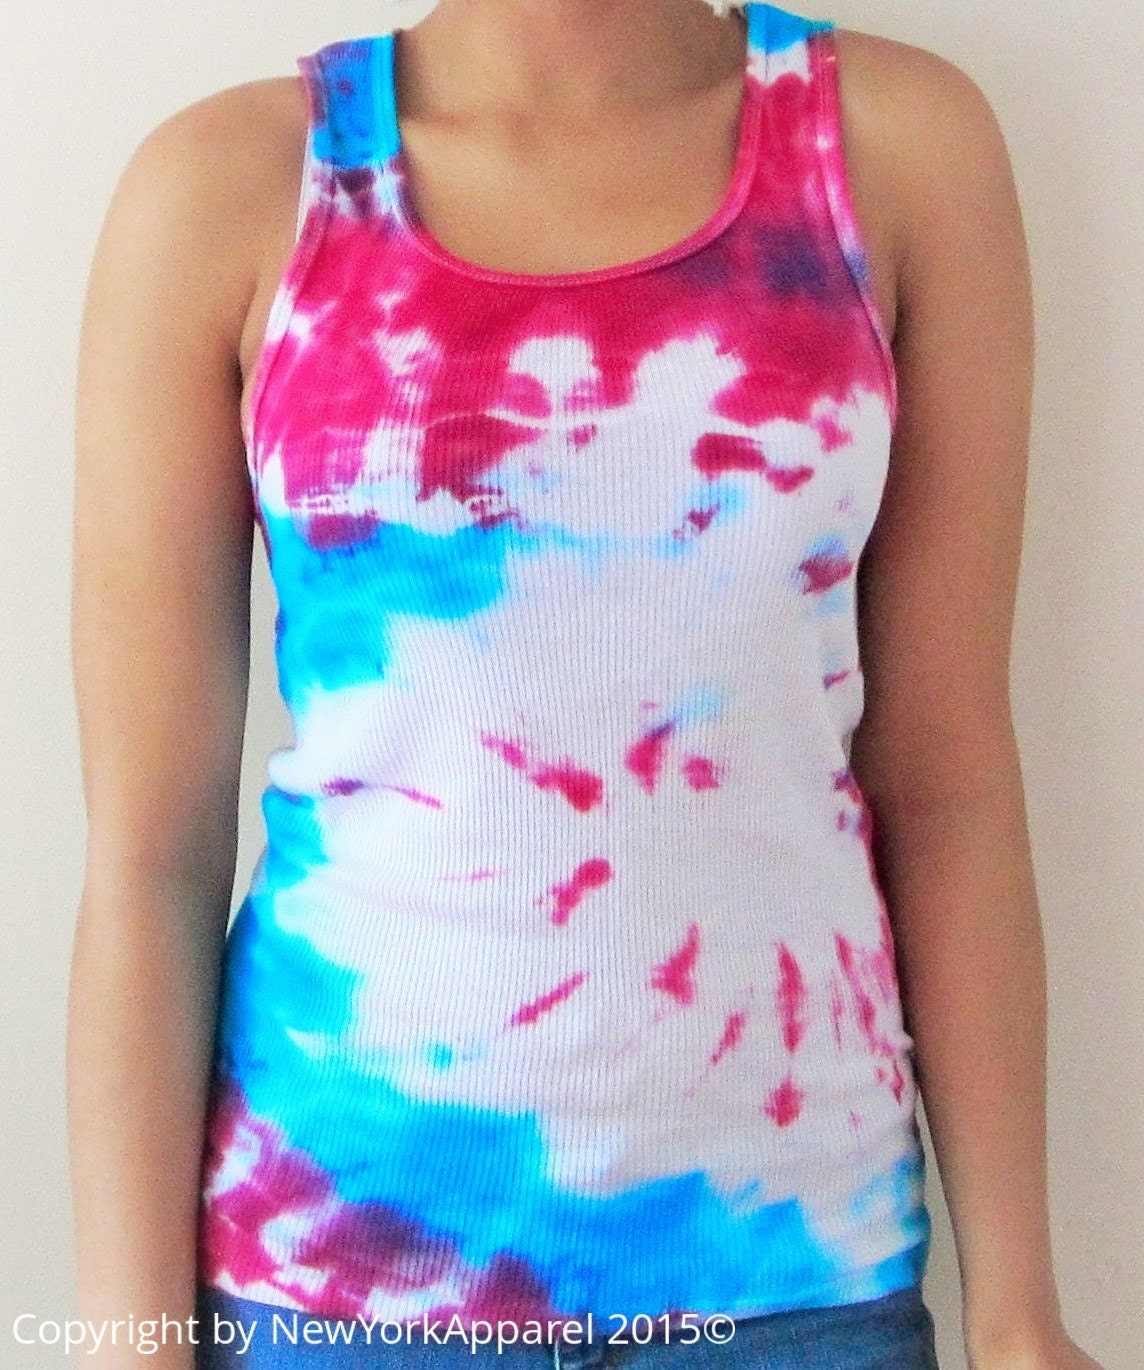 Cotton Candy Blue and Pink Tie Dye Tank Top by NewYorkApparel